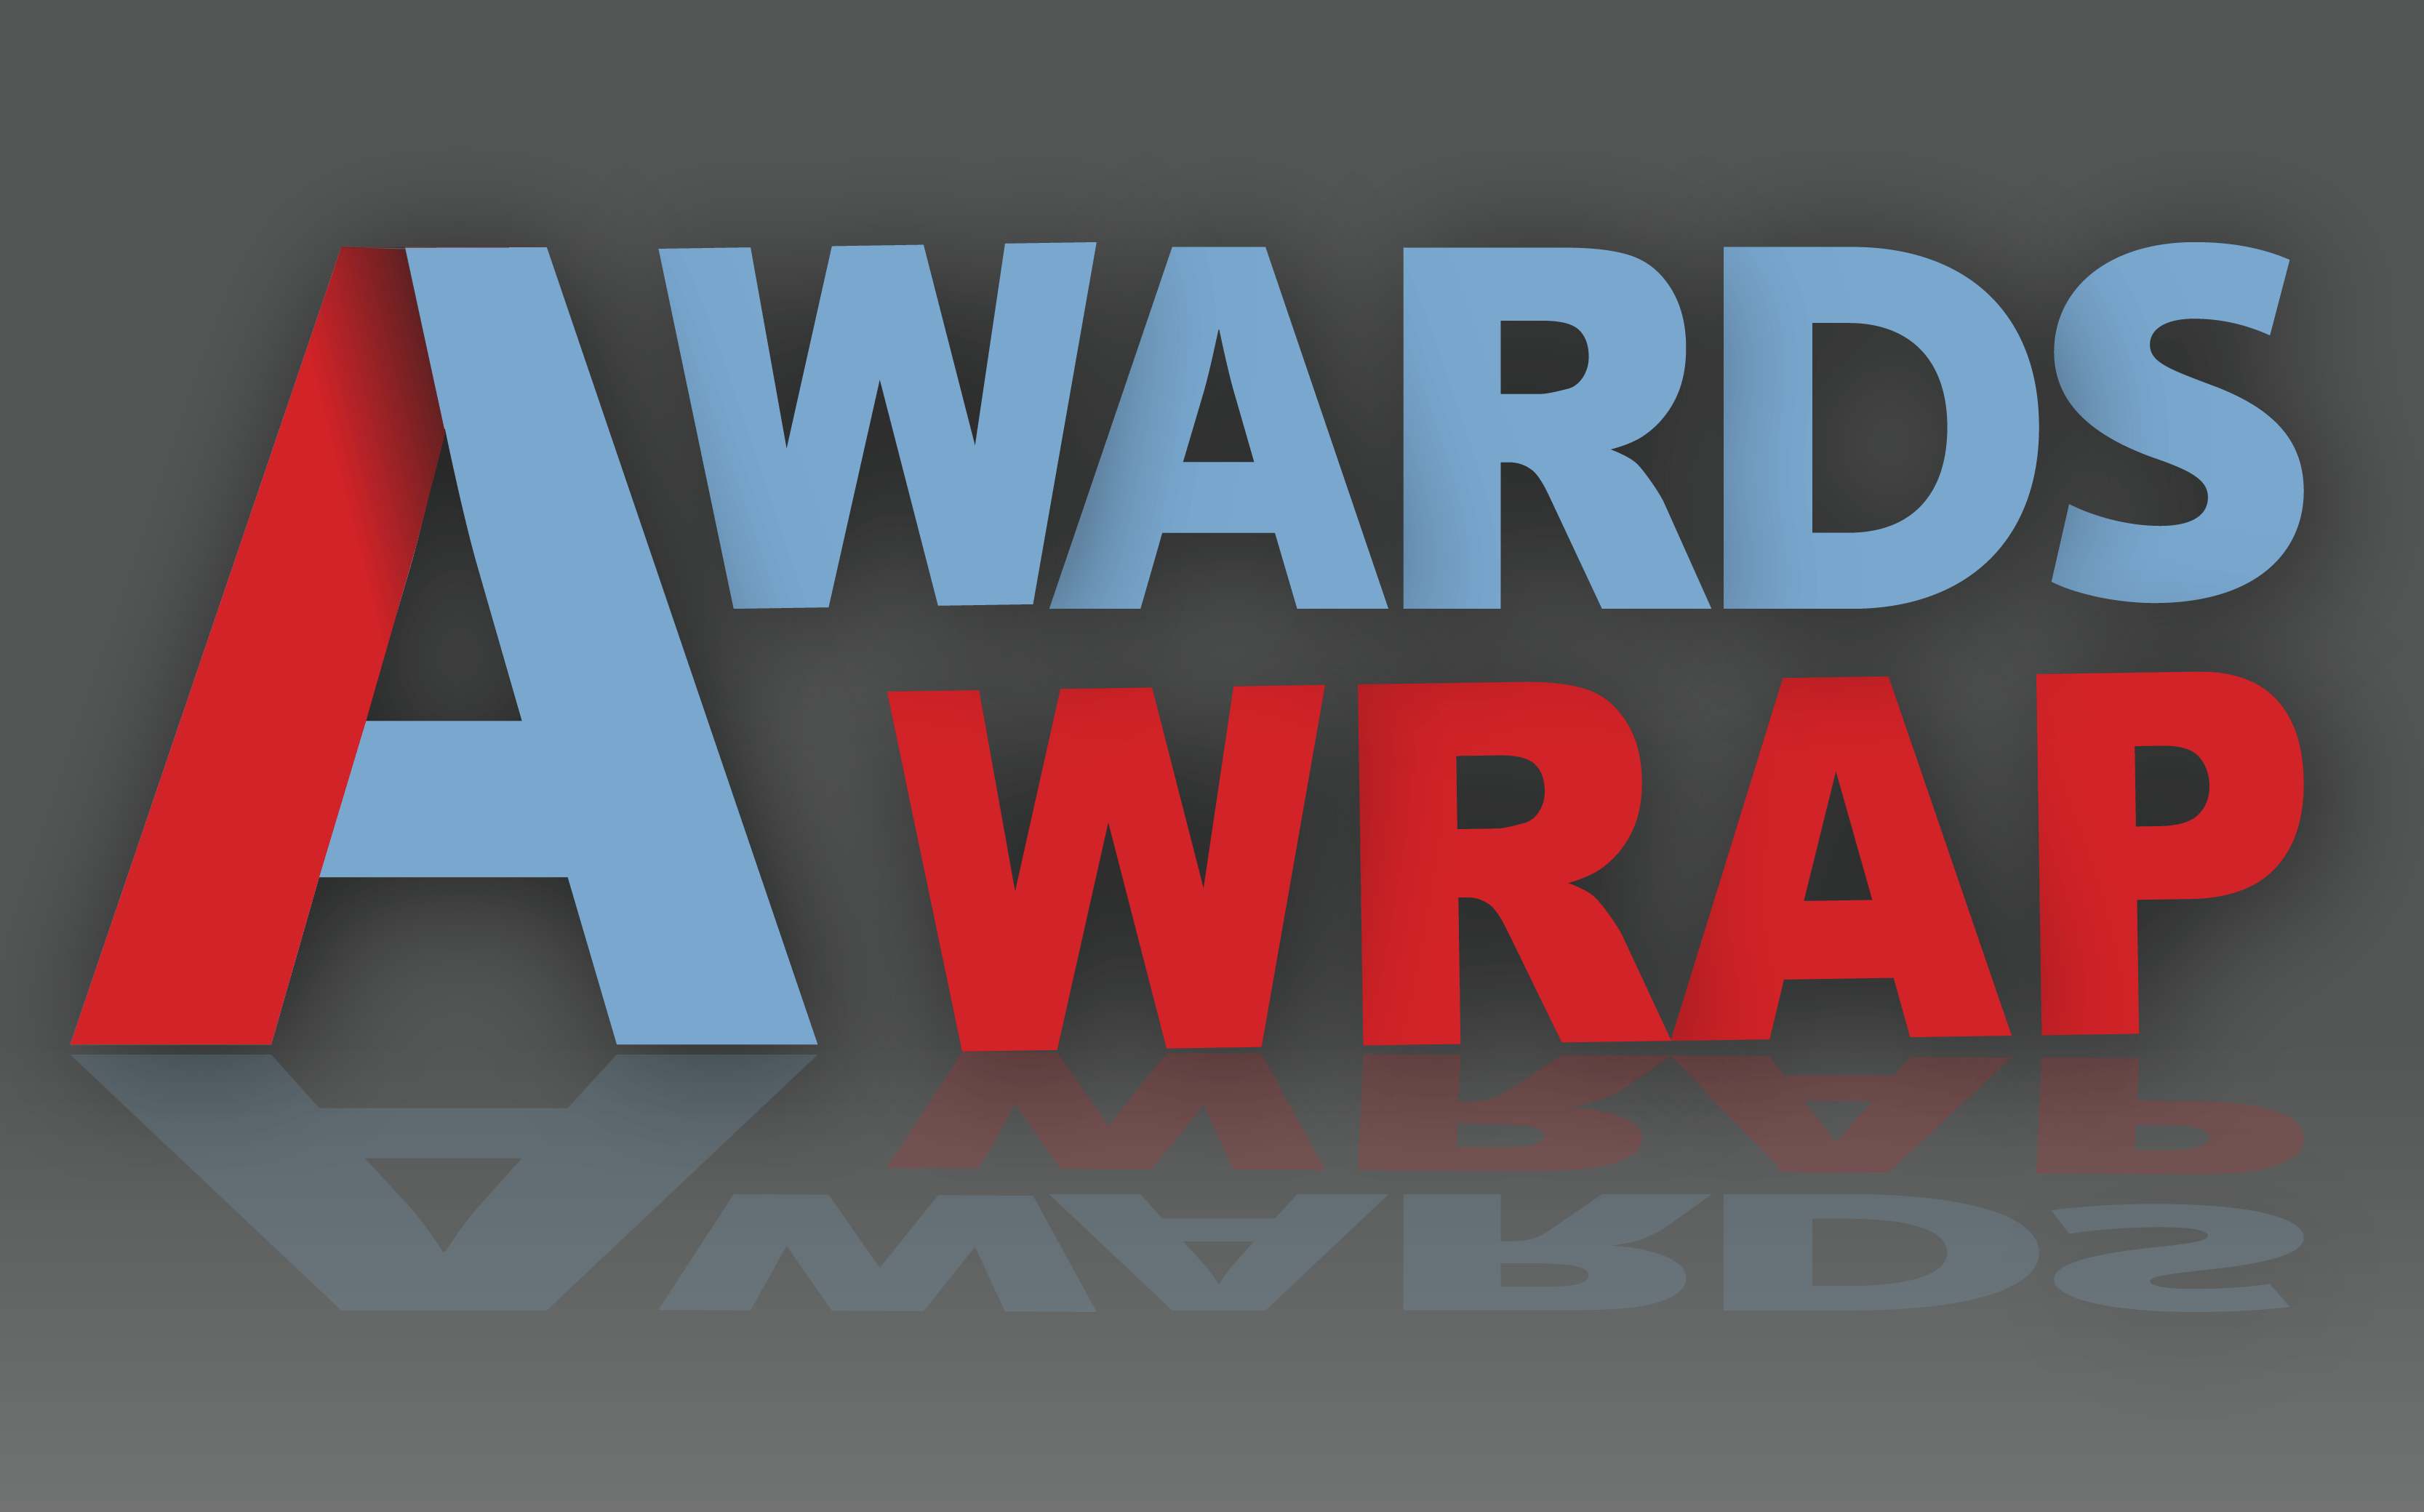 Awards Wrap: Bookmark Awards video reveals ad insights, Women in MICE awards deadline extended, WARC Awards juries revealed